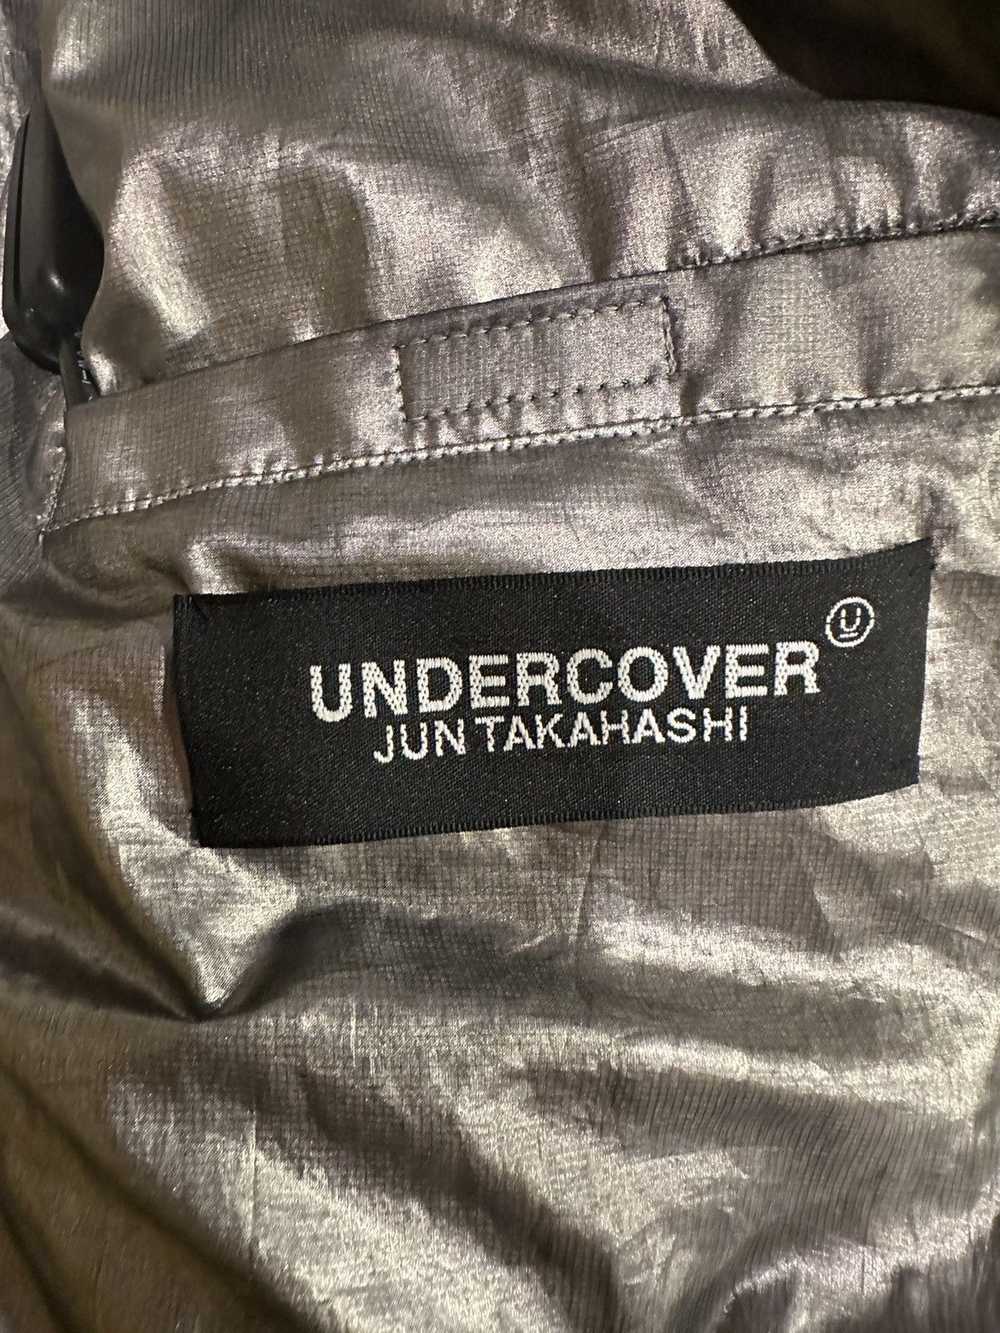 Undercover Undercover 2001 Space Odyssey Jacket A… - image 5